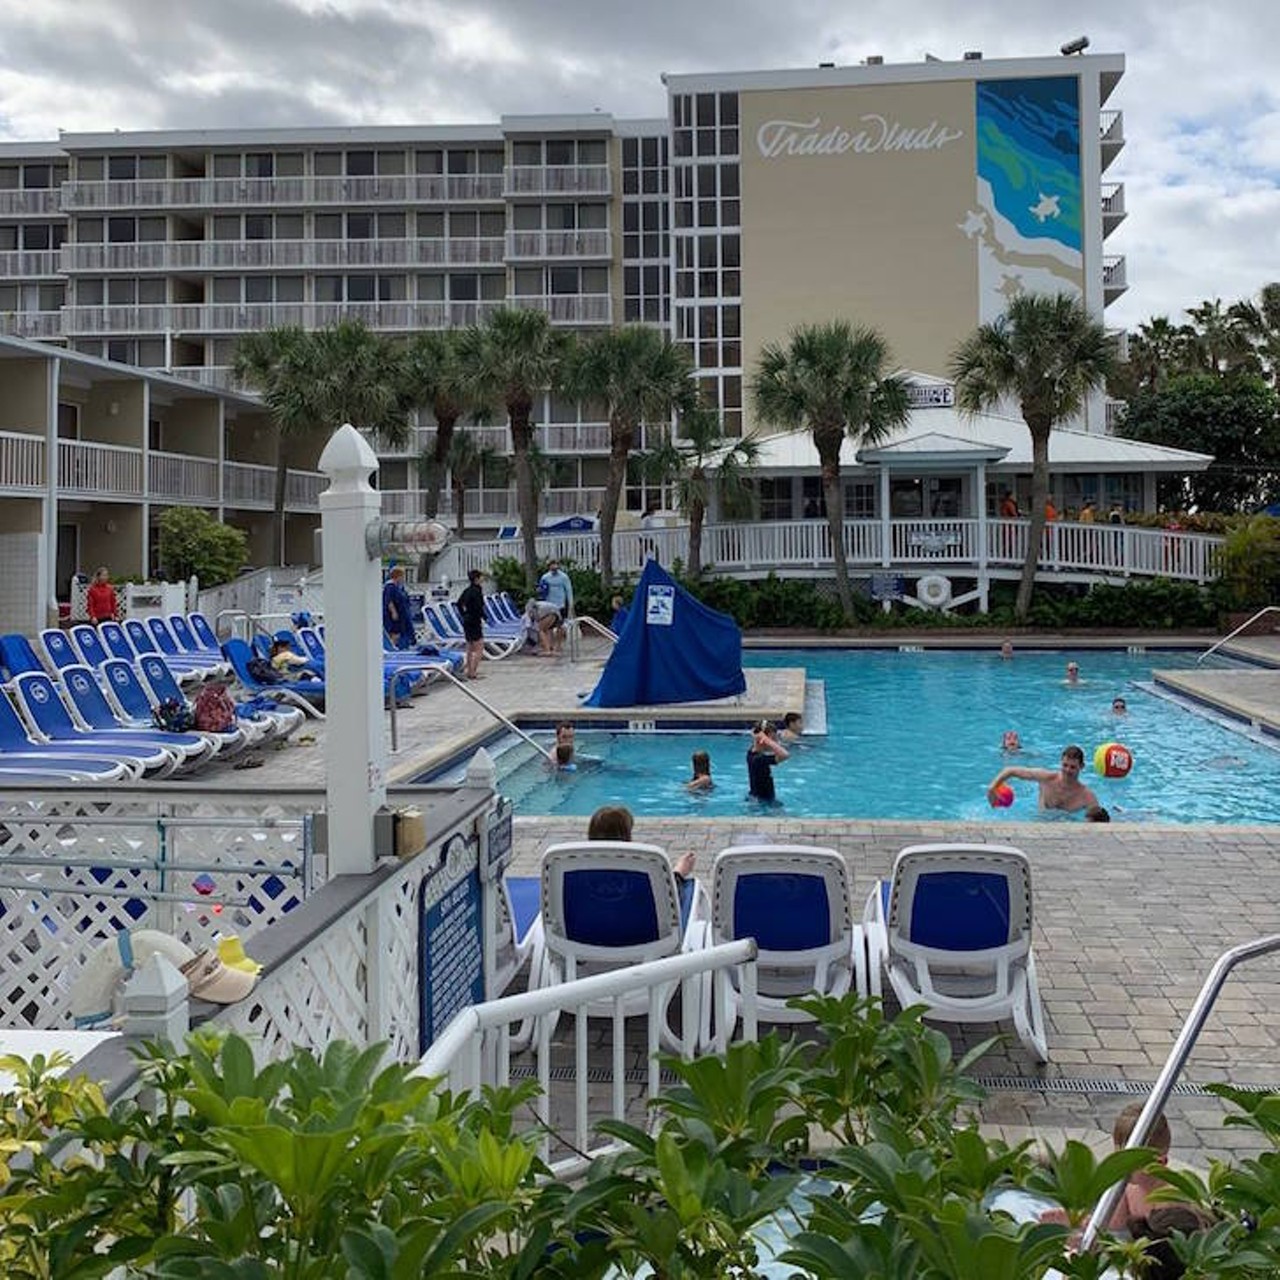 Tradewinds Island Resort 
5500 Gulf Blvd, St Pete Beach, FL 33706, (800) 249-1667
Price: $45 day pass 
Huge inflatable water slides, banana boat rides, beach bars, mini golf, paddle boats&#150;&#150;Tradewinds Island Resort offers various types of aquatic fun that won&#146;t make you think twice about coughing up $45 for a day pass. Oh, and they have pools too. 
Photo via  Tradewinds/Facebook